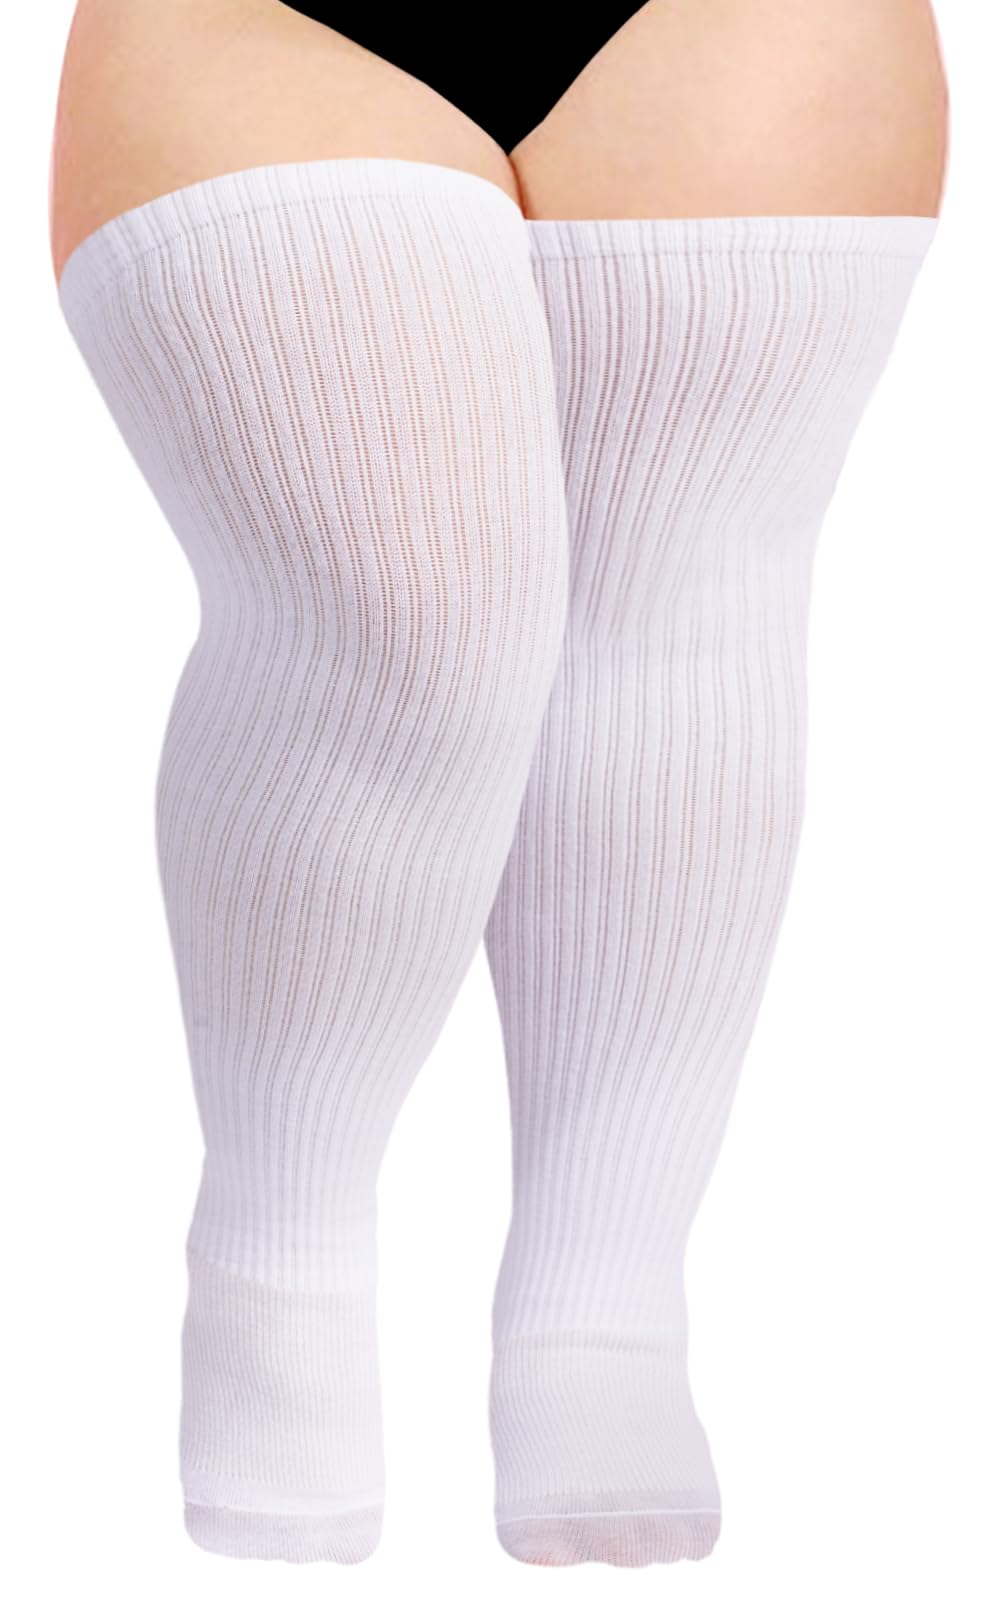 Womens Knit Cotton Extra Long Over the Knee High Socks-White - Moon Wood